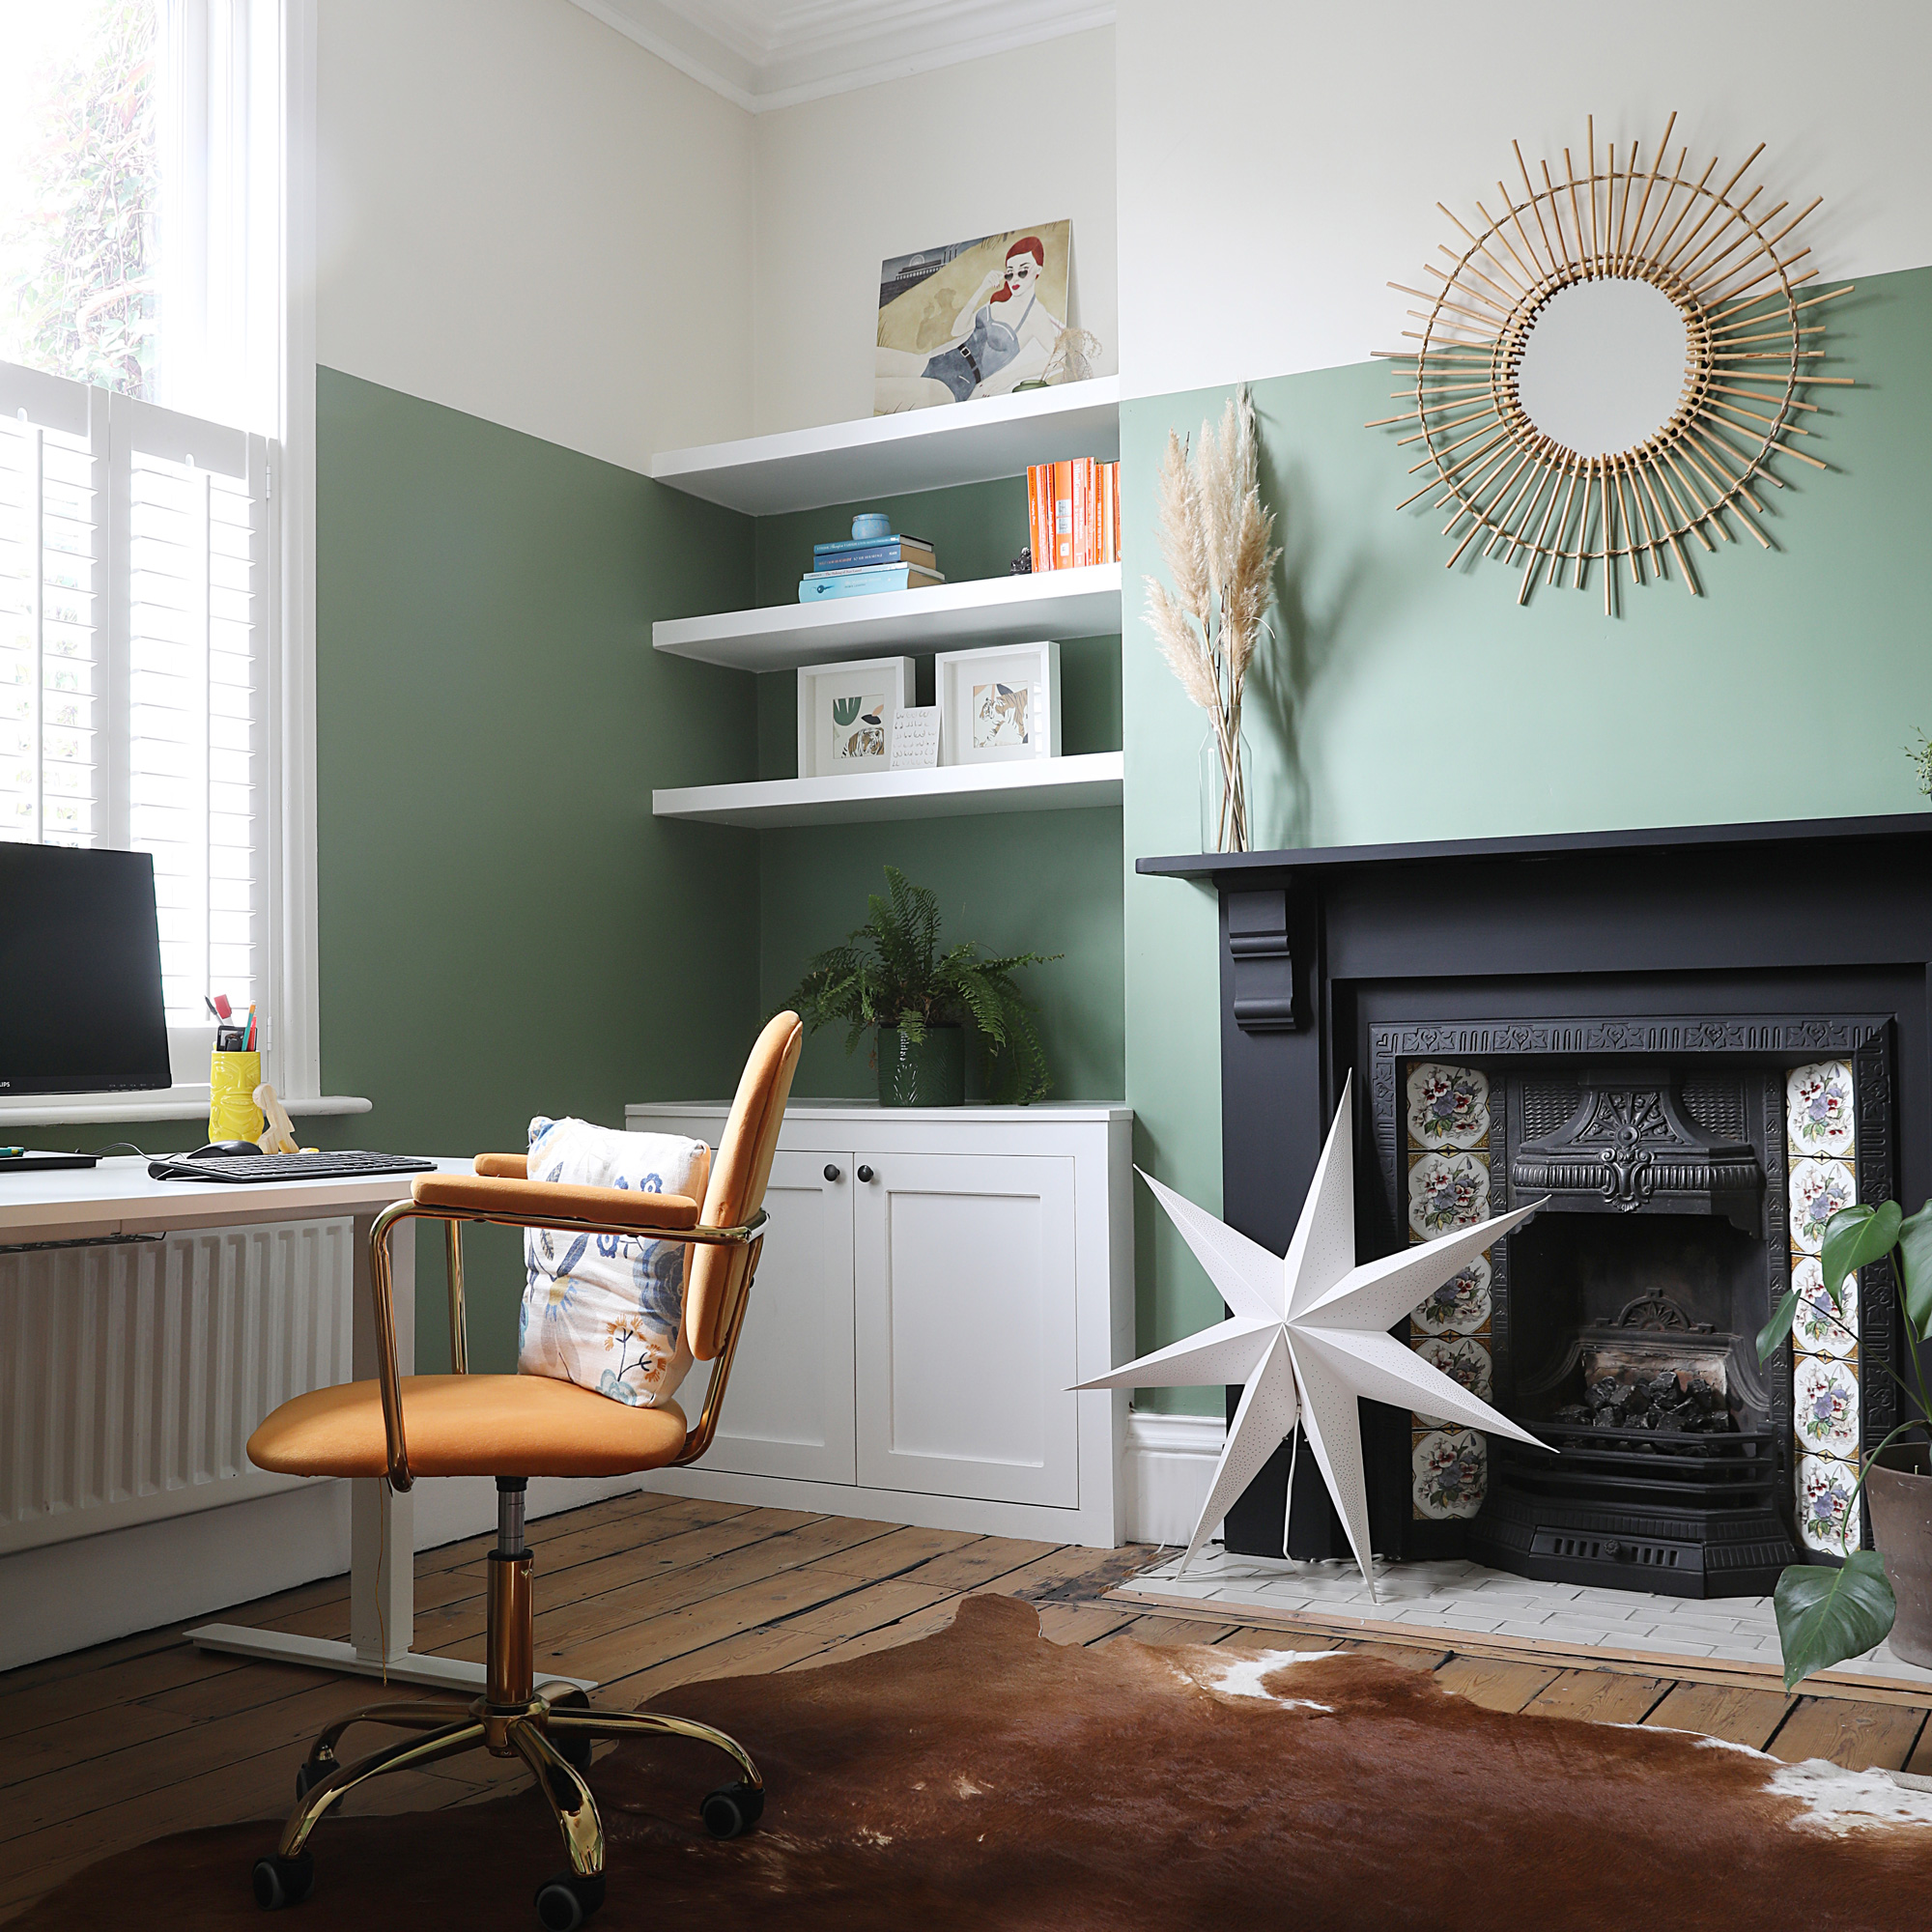 Victorian property revamp study home office with green walls and desk with chair